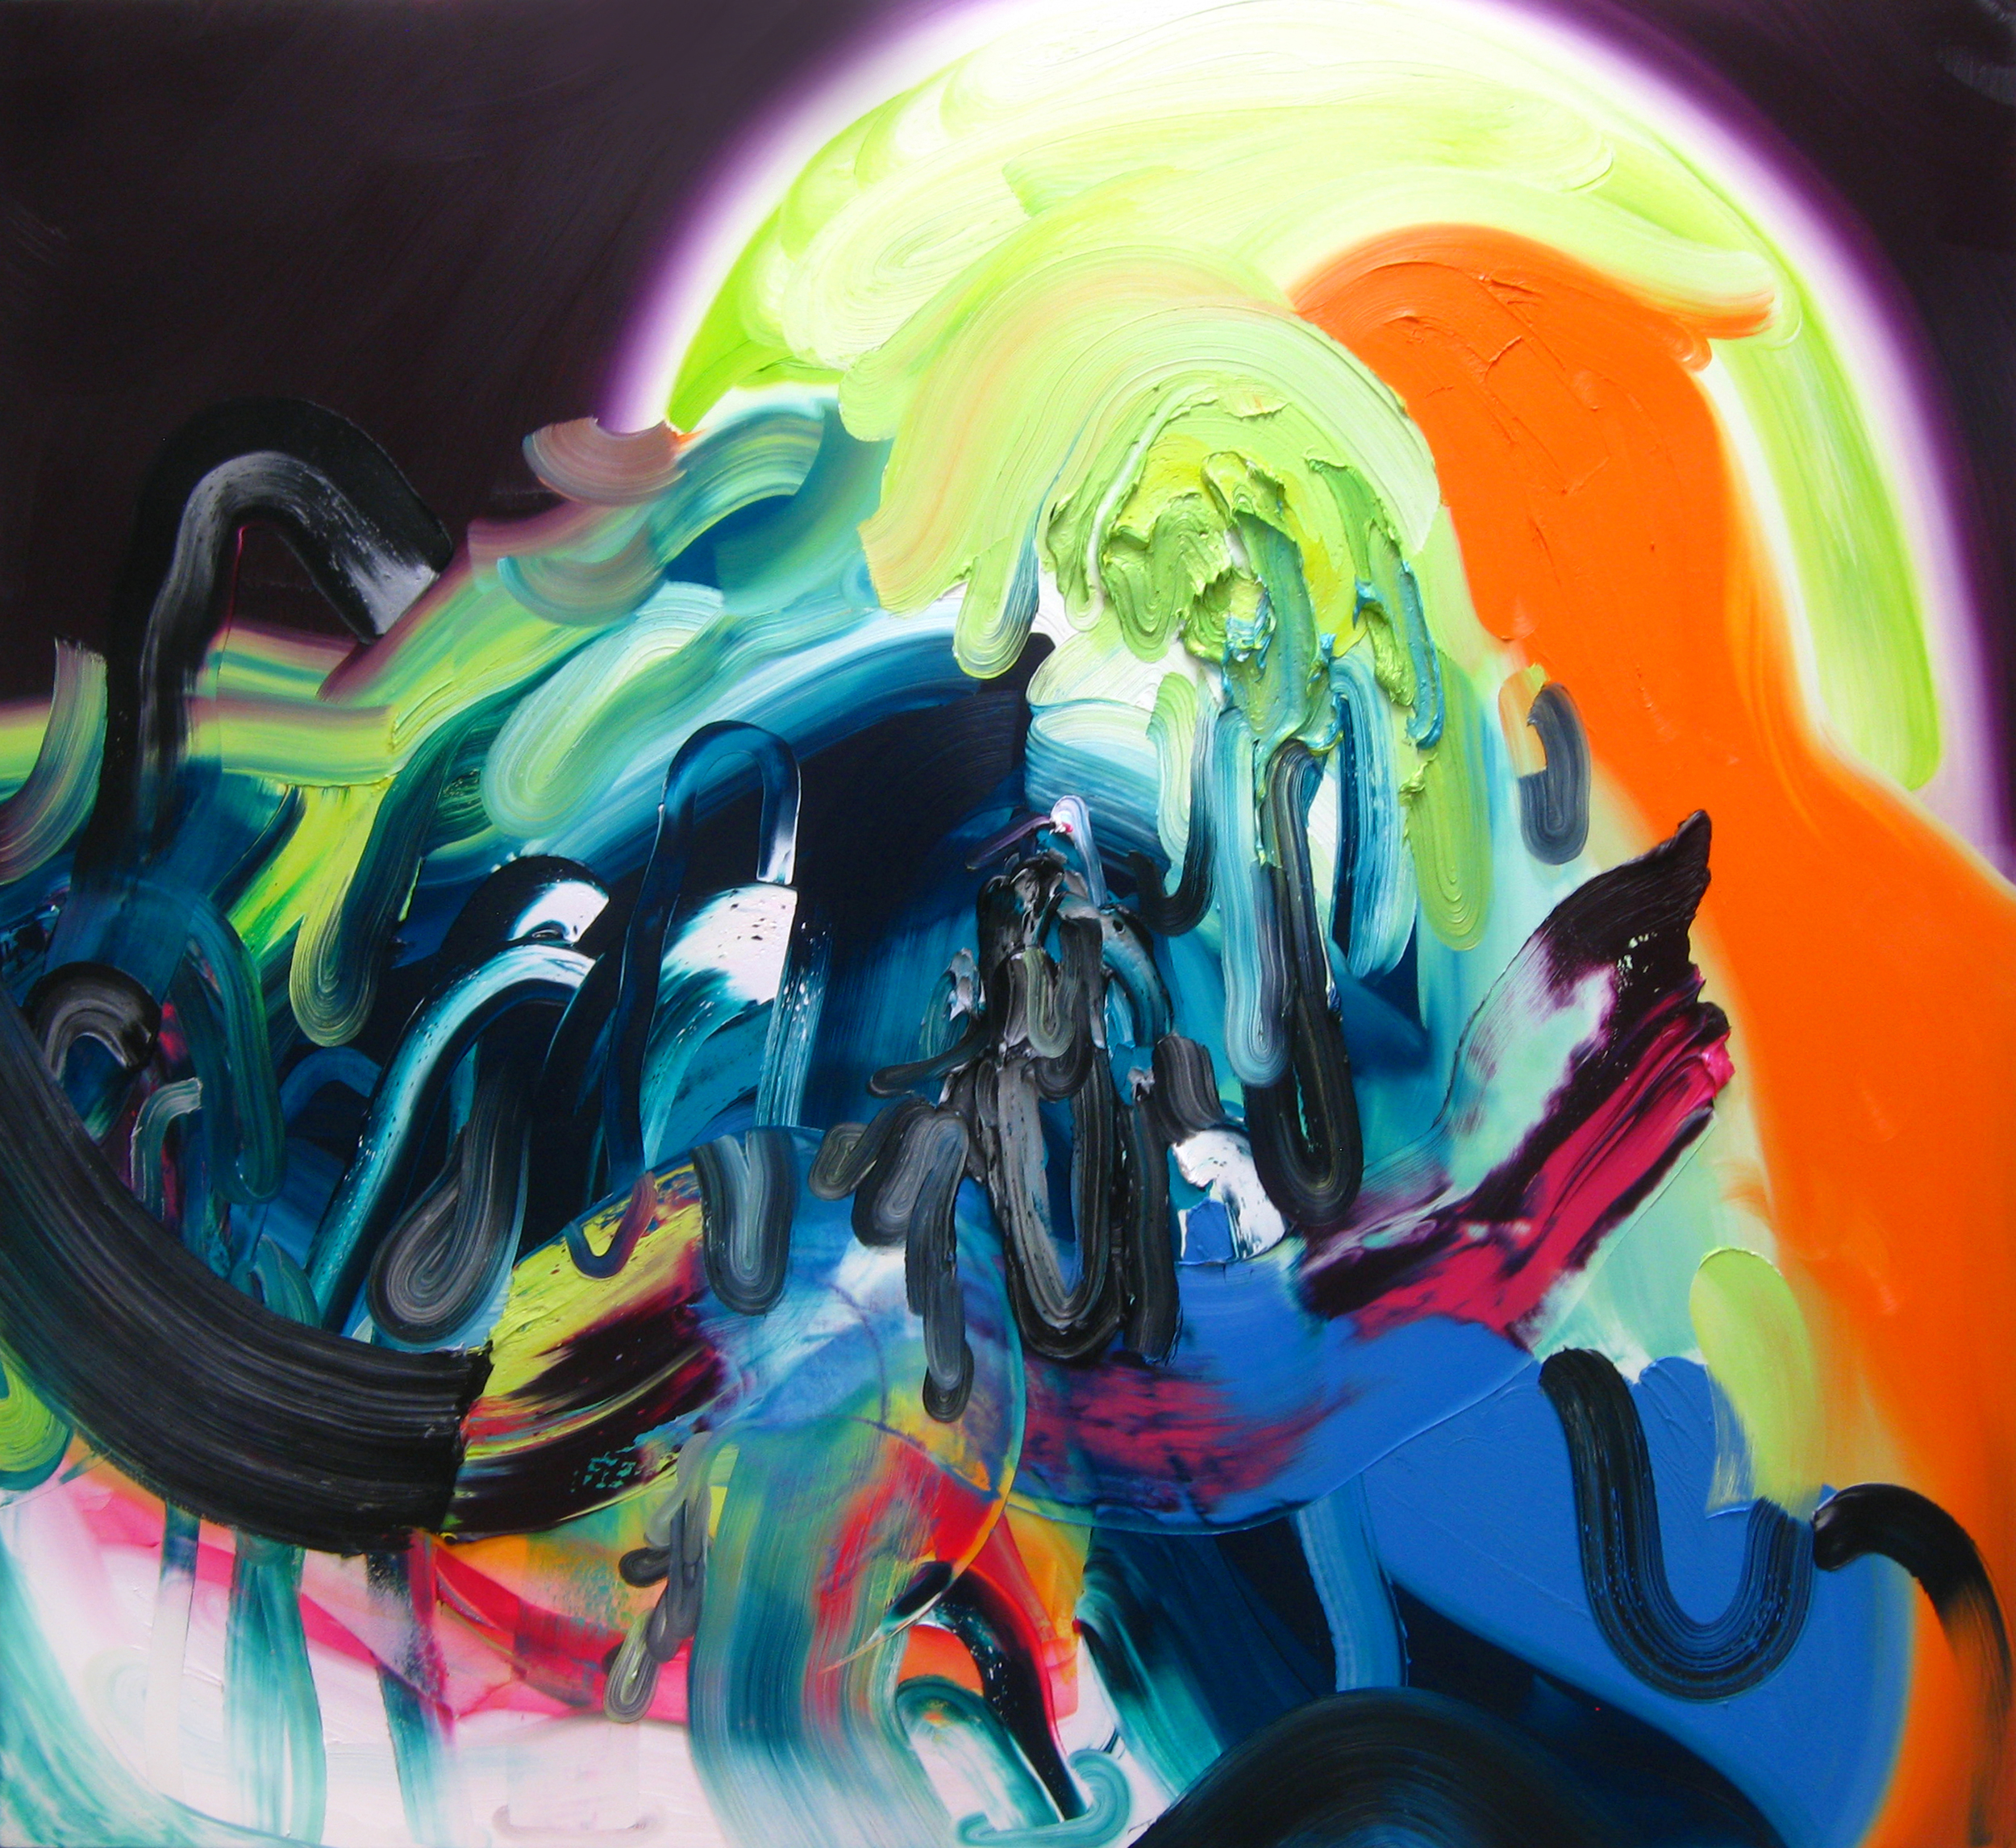 Spill Out / oil on canvas / 50 x 55 inches (sold)